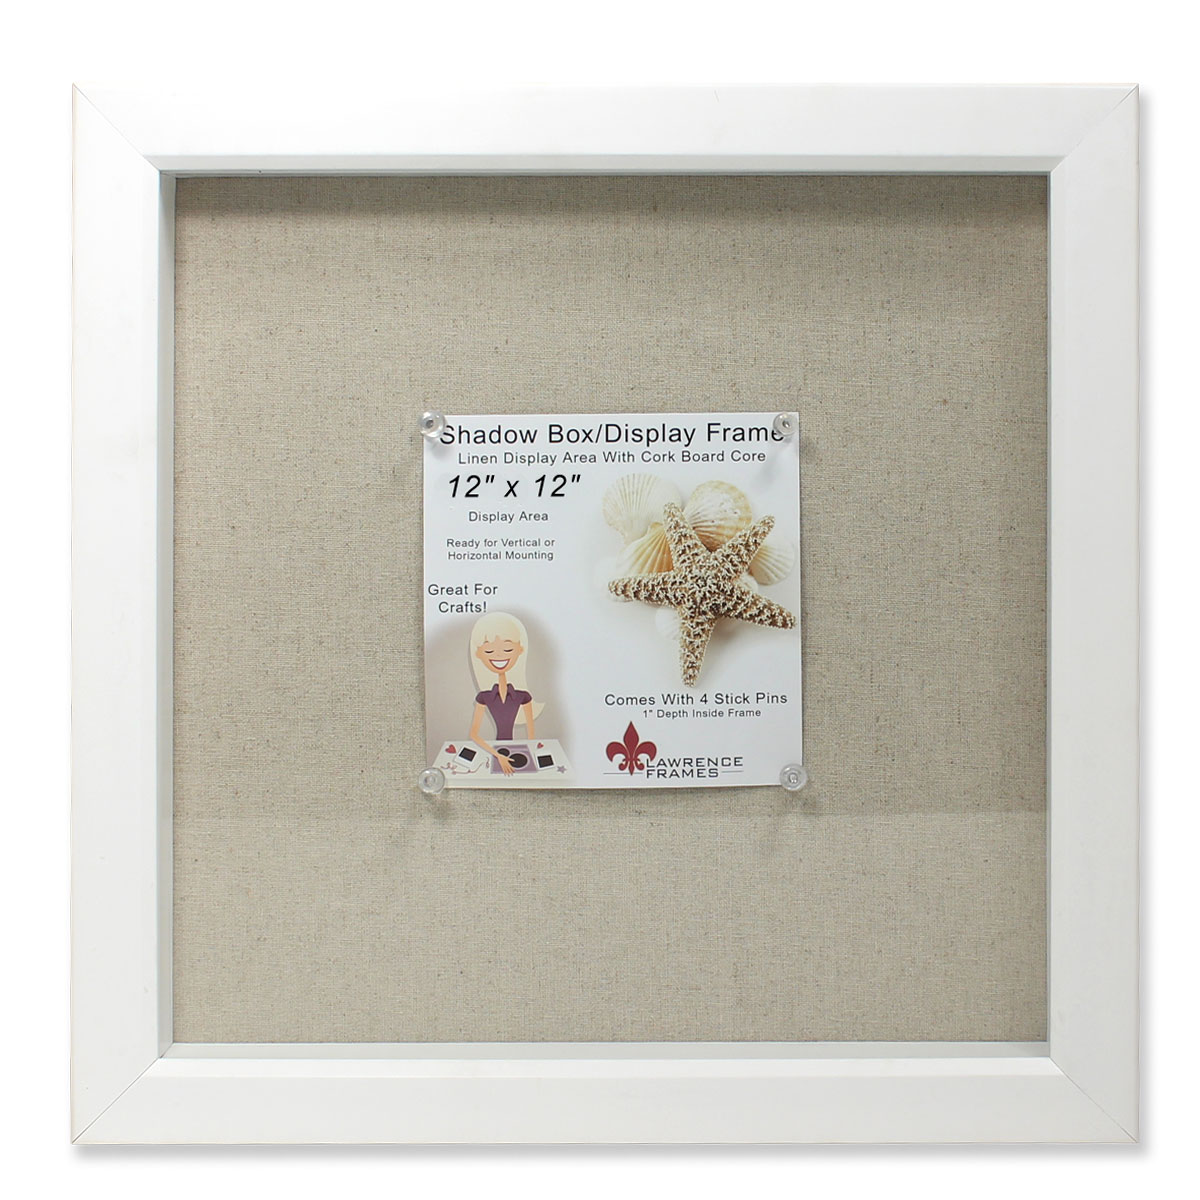 Lawrence Frames 12x12 White Shadow Box Frame - Linen Inner Display Board - image 1 of 3